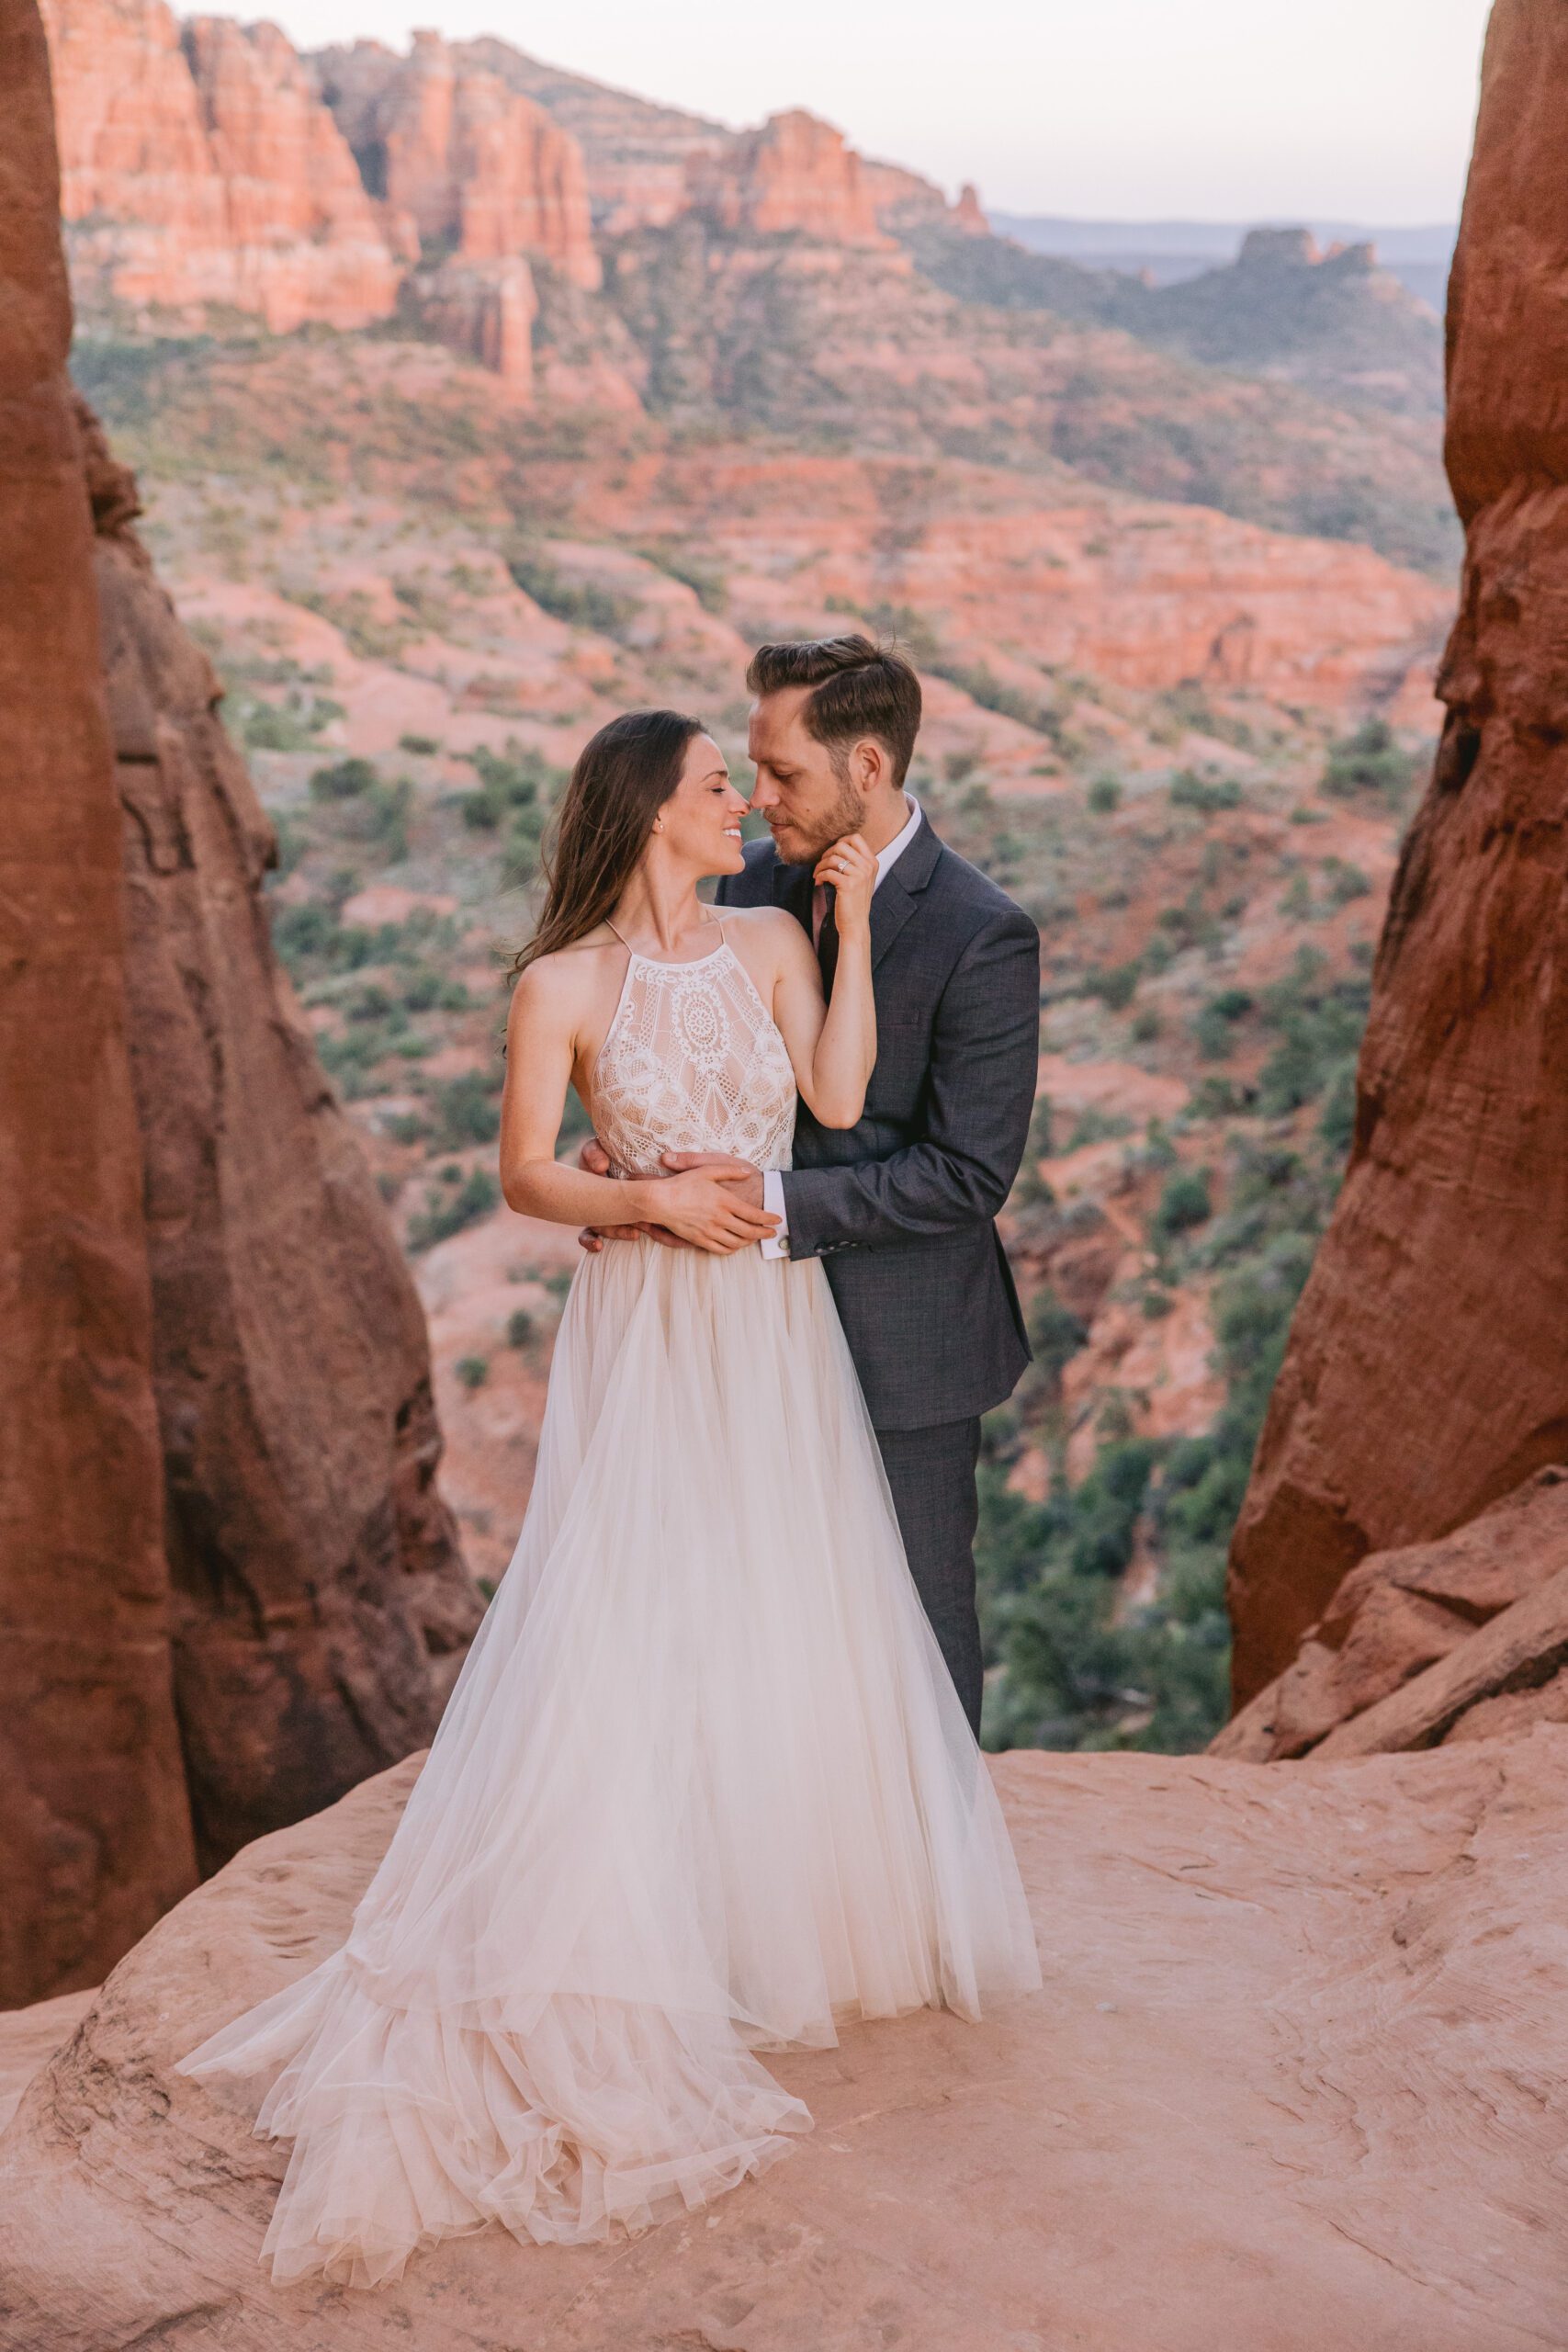 The red rock spires and rose colored Sedona mountains surround a couple on their elopement. A bride wearing a white dress reaches her hand back to touch her grooms face while he holds her. He's wearing a grey suit.